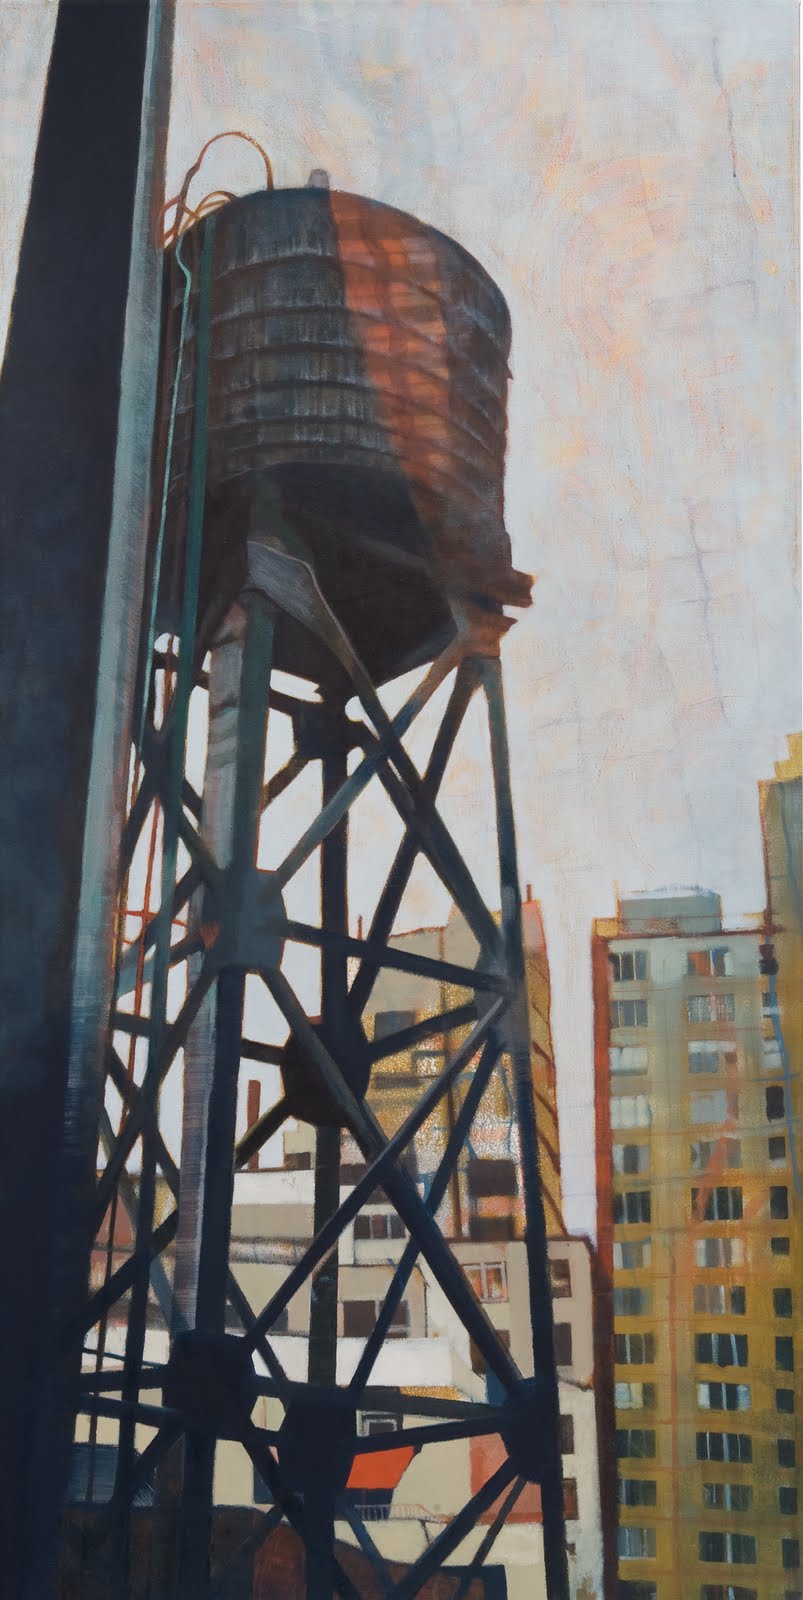 "57th St. Watertower", oil on linen, 44 x 22 x 2.5 in.